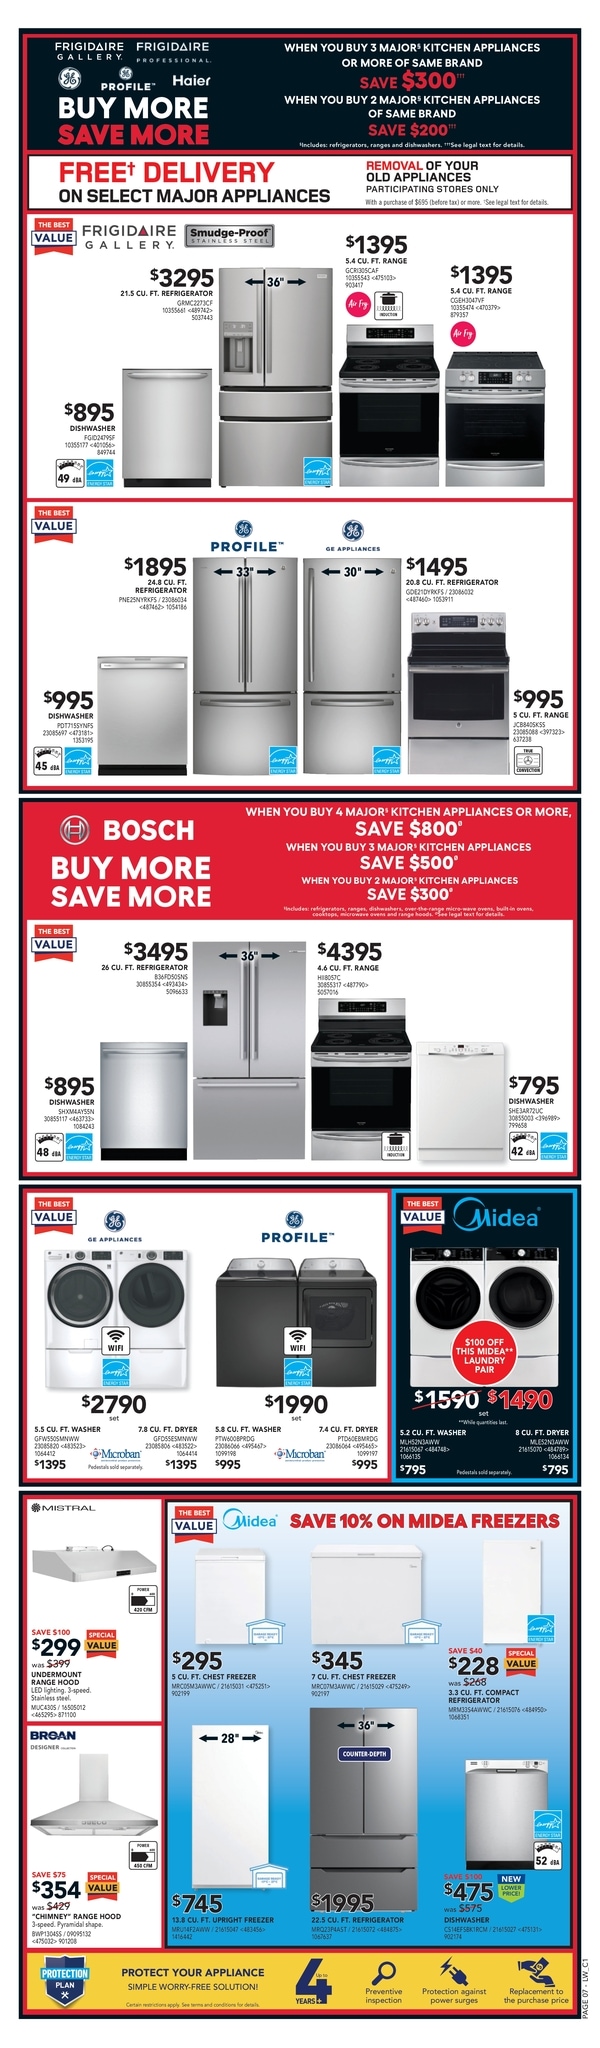 LOWE'S - Weekly Flyer Specials - Black Friday - Page 9